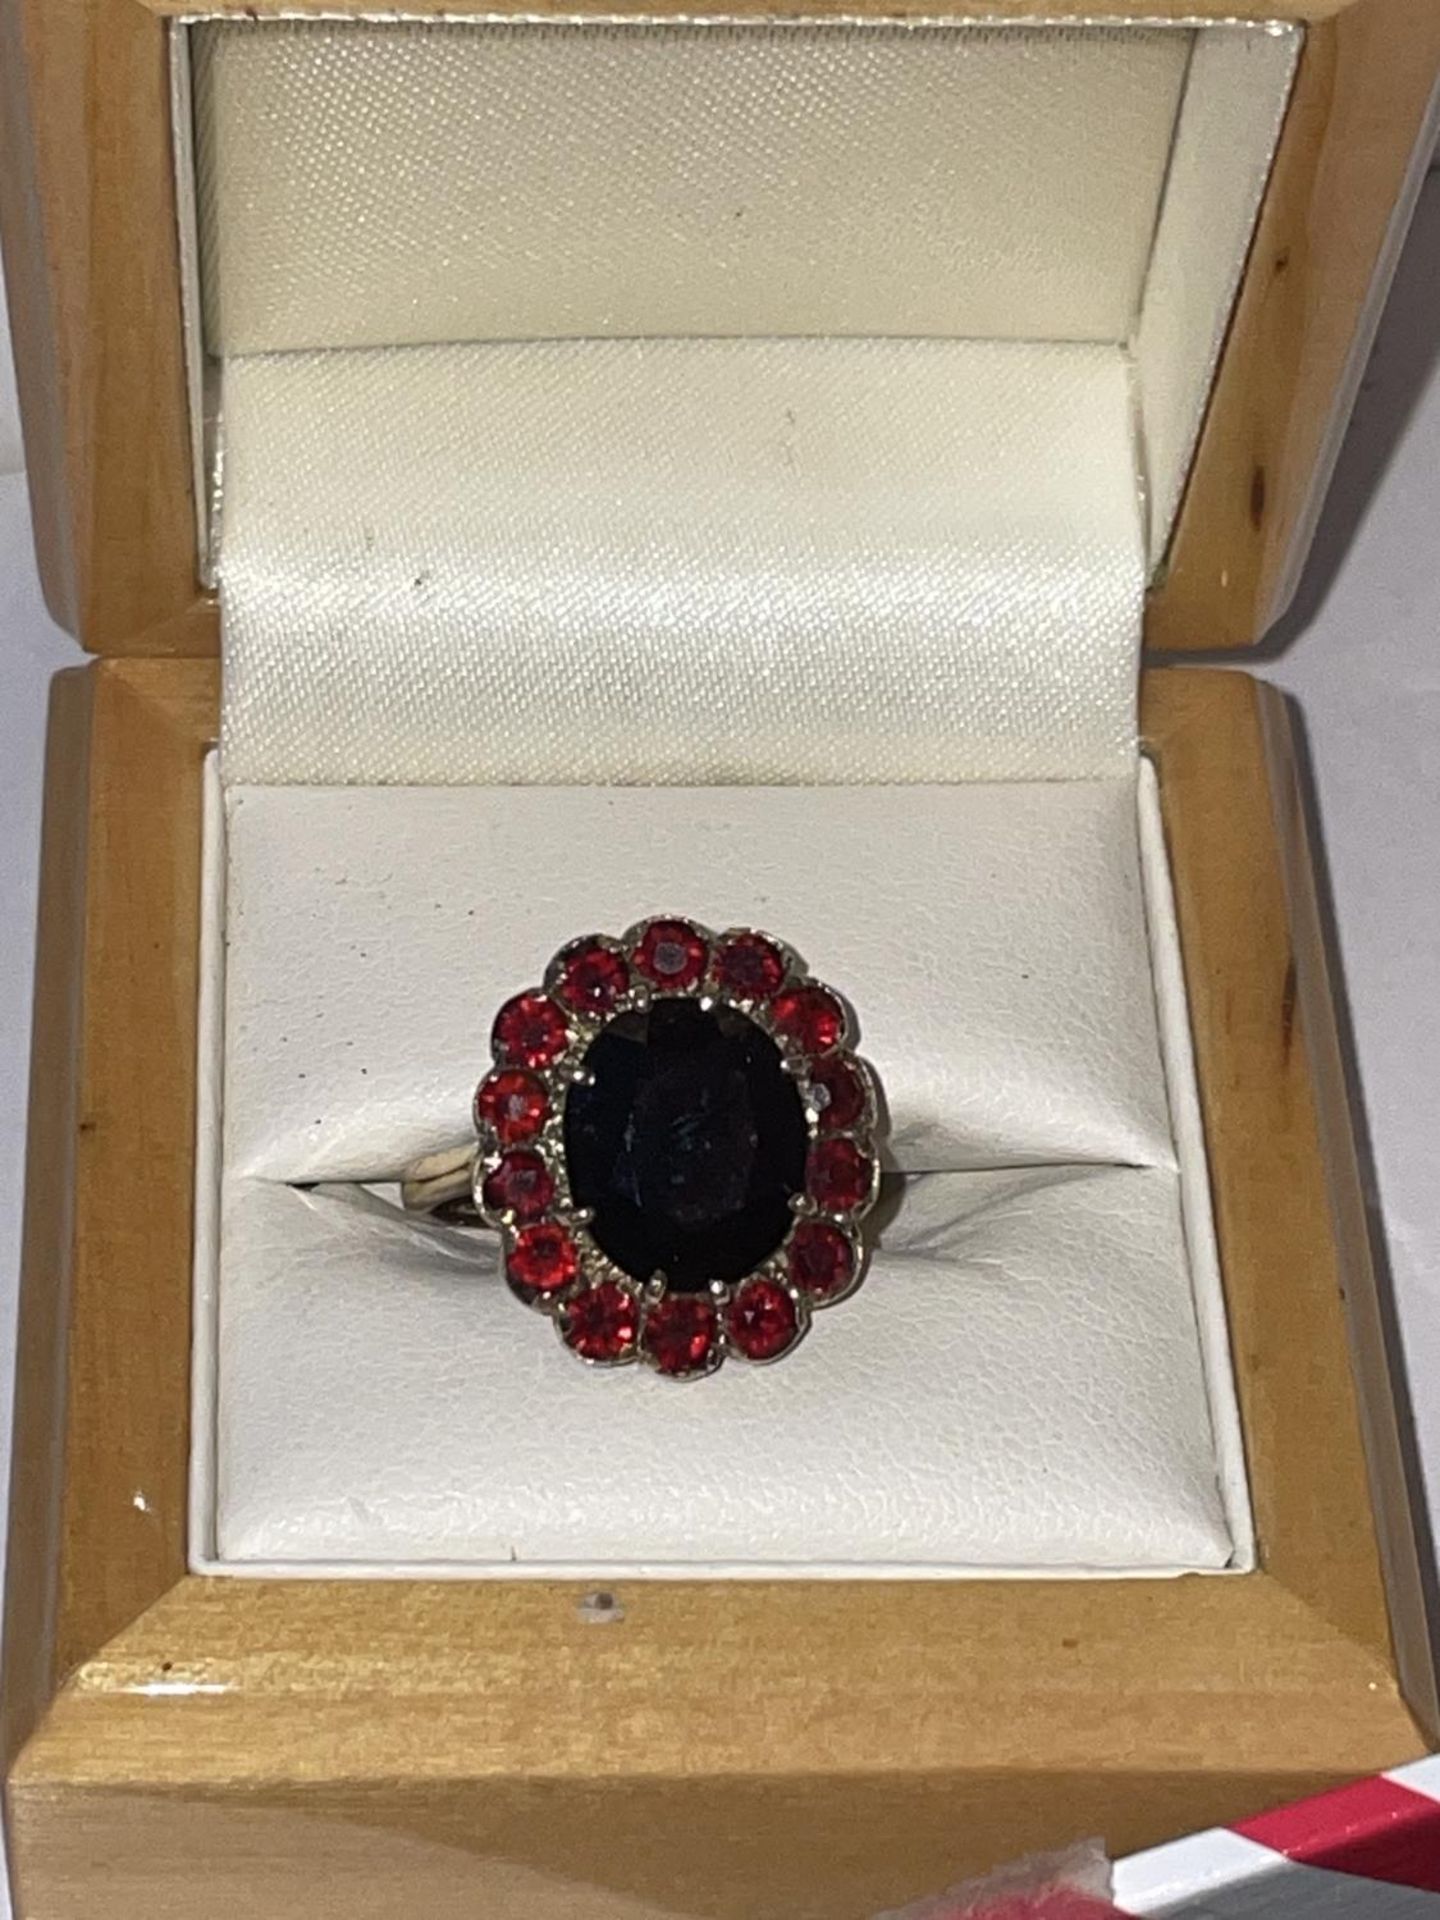 A 9CT YELLOW GOLD AND GARNET RING IN A FLOWER DESIGN SIZE P, WEIGHT 5.46 GRAMS - Image 5 of 5